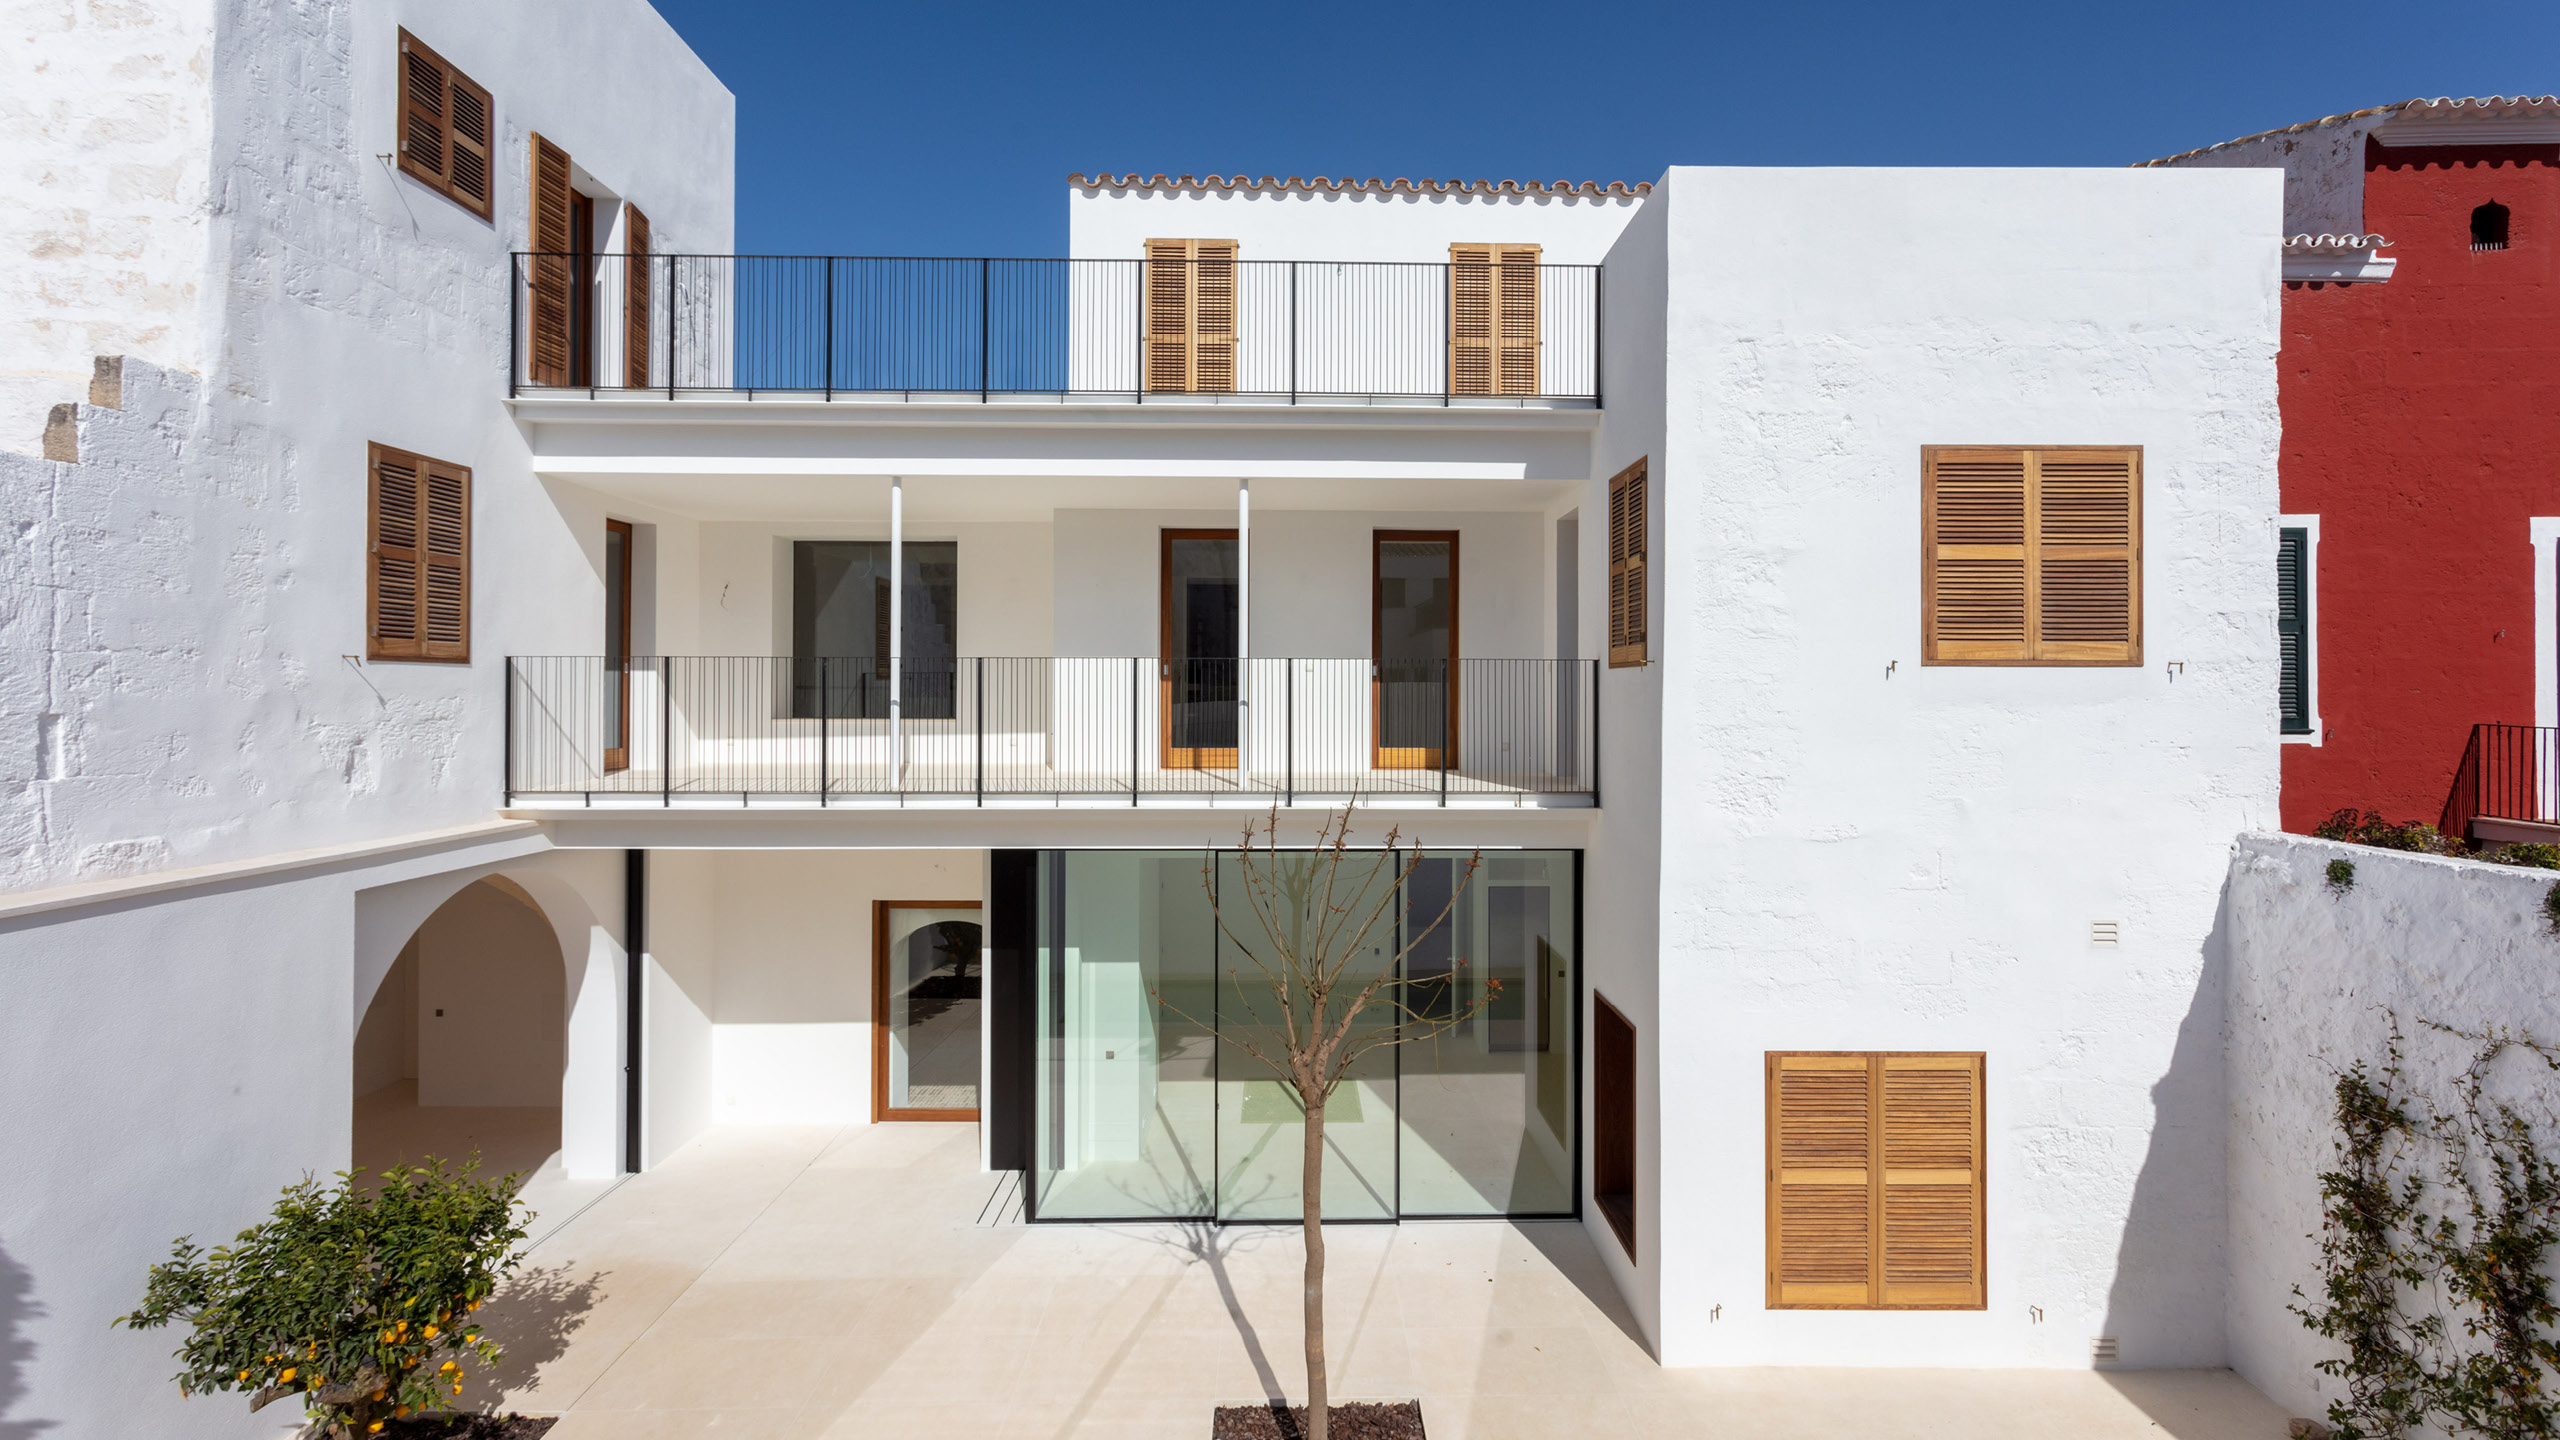 Villa B shortlisted as a finalist for the World Architecture Festival Awards